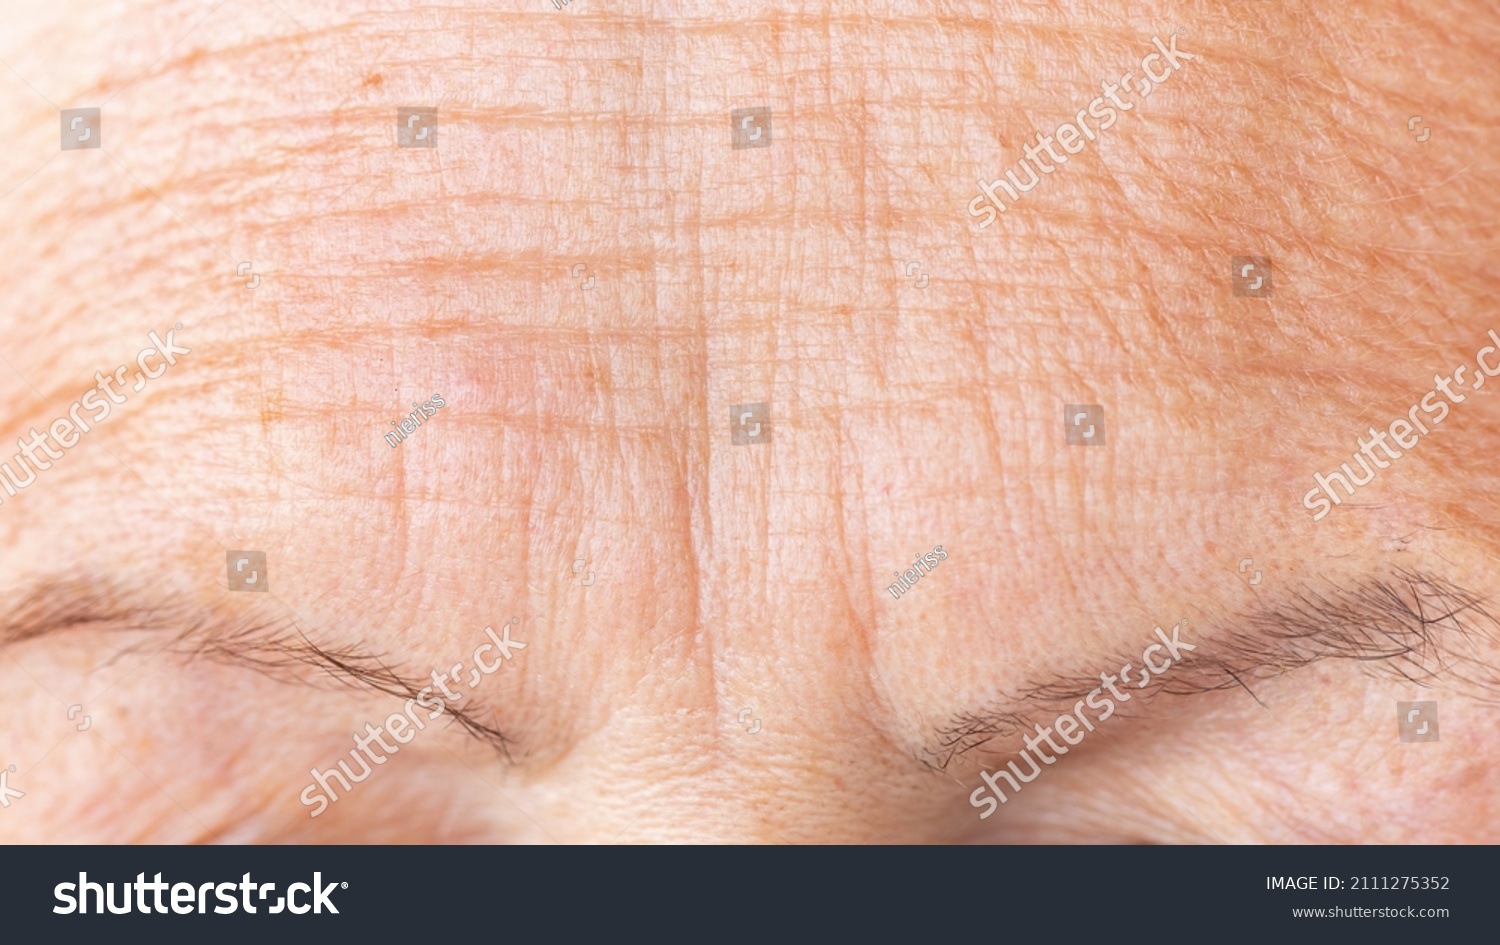 Wrinkled skin of a mature woman's forehead macro photography. Deep aging wrinkles close up. Prevention of age-related skin changes concept. Cosmetology procedures against aging and wrinkles concept. #2111275352